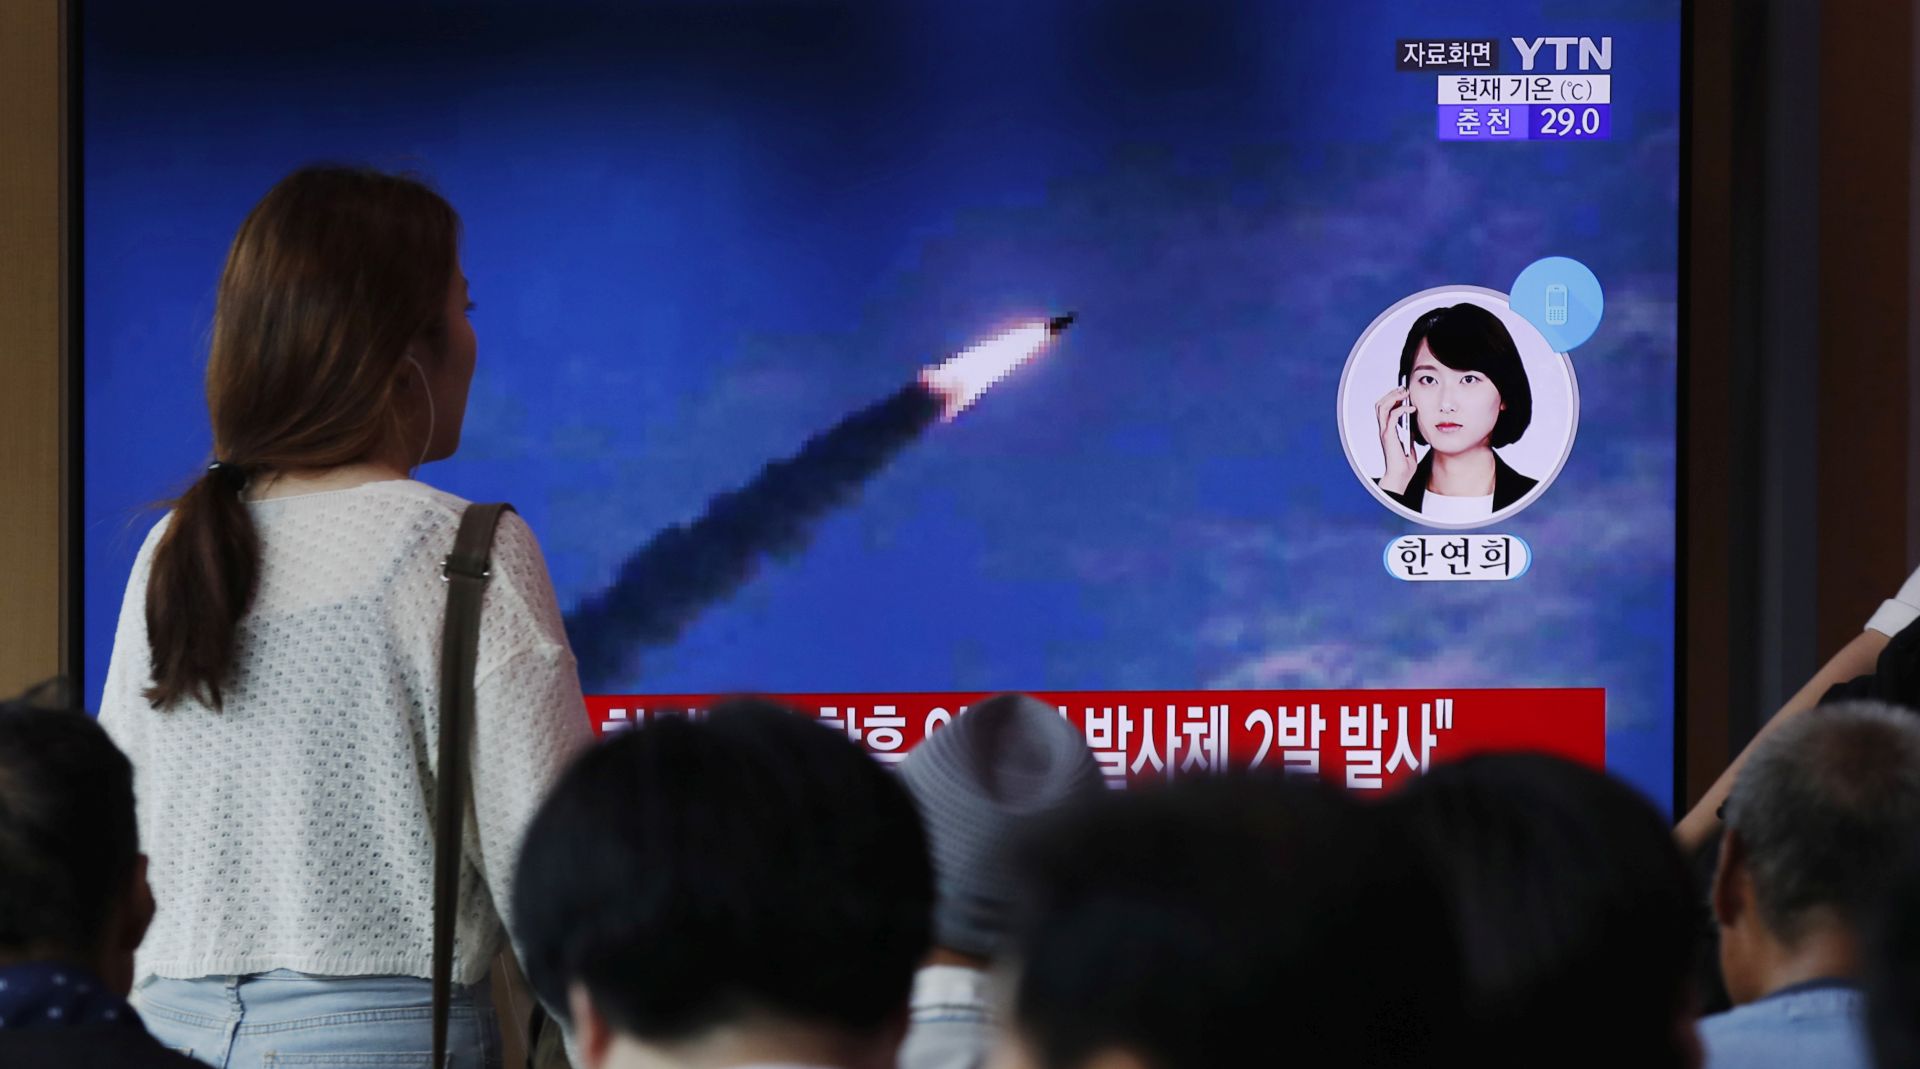 epa07887847 (FILE) - South Korean people watch breaking news reports of North Korea's missile launch at Seoul Station in Seoul, South Korea, 10 August 2019 (reissued 02 October 2019). According to media reports, North Korea tested a projectile suspected to be a submarine-launched ballistic missile on 02 October. The projectile apparently reached an altitude of 910km before landing in the Sea of Japan.  EPA/JEON HEON-KYUN